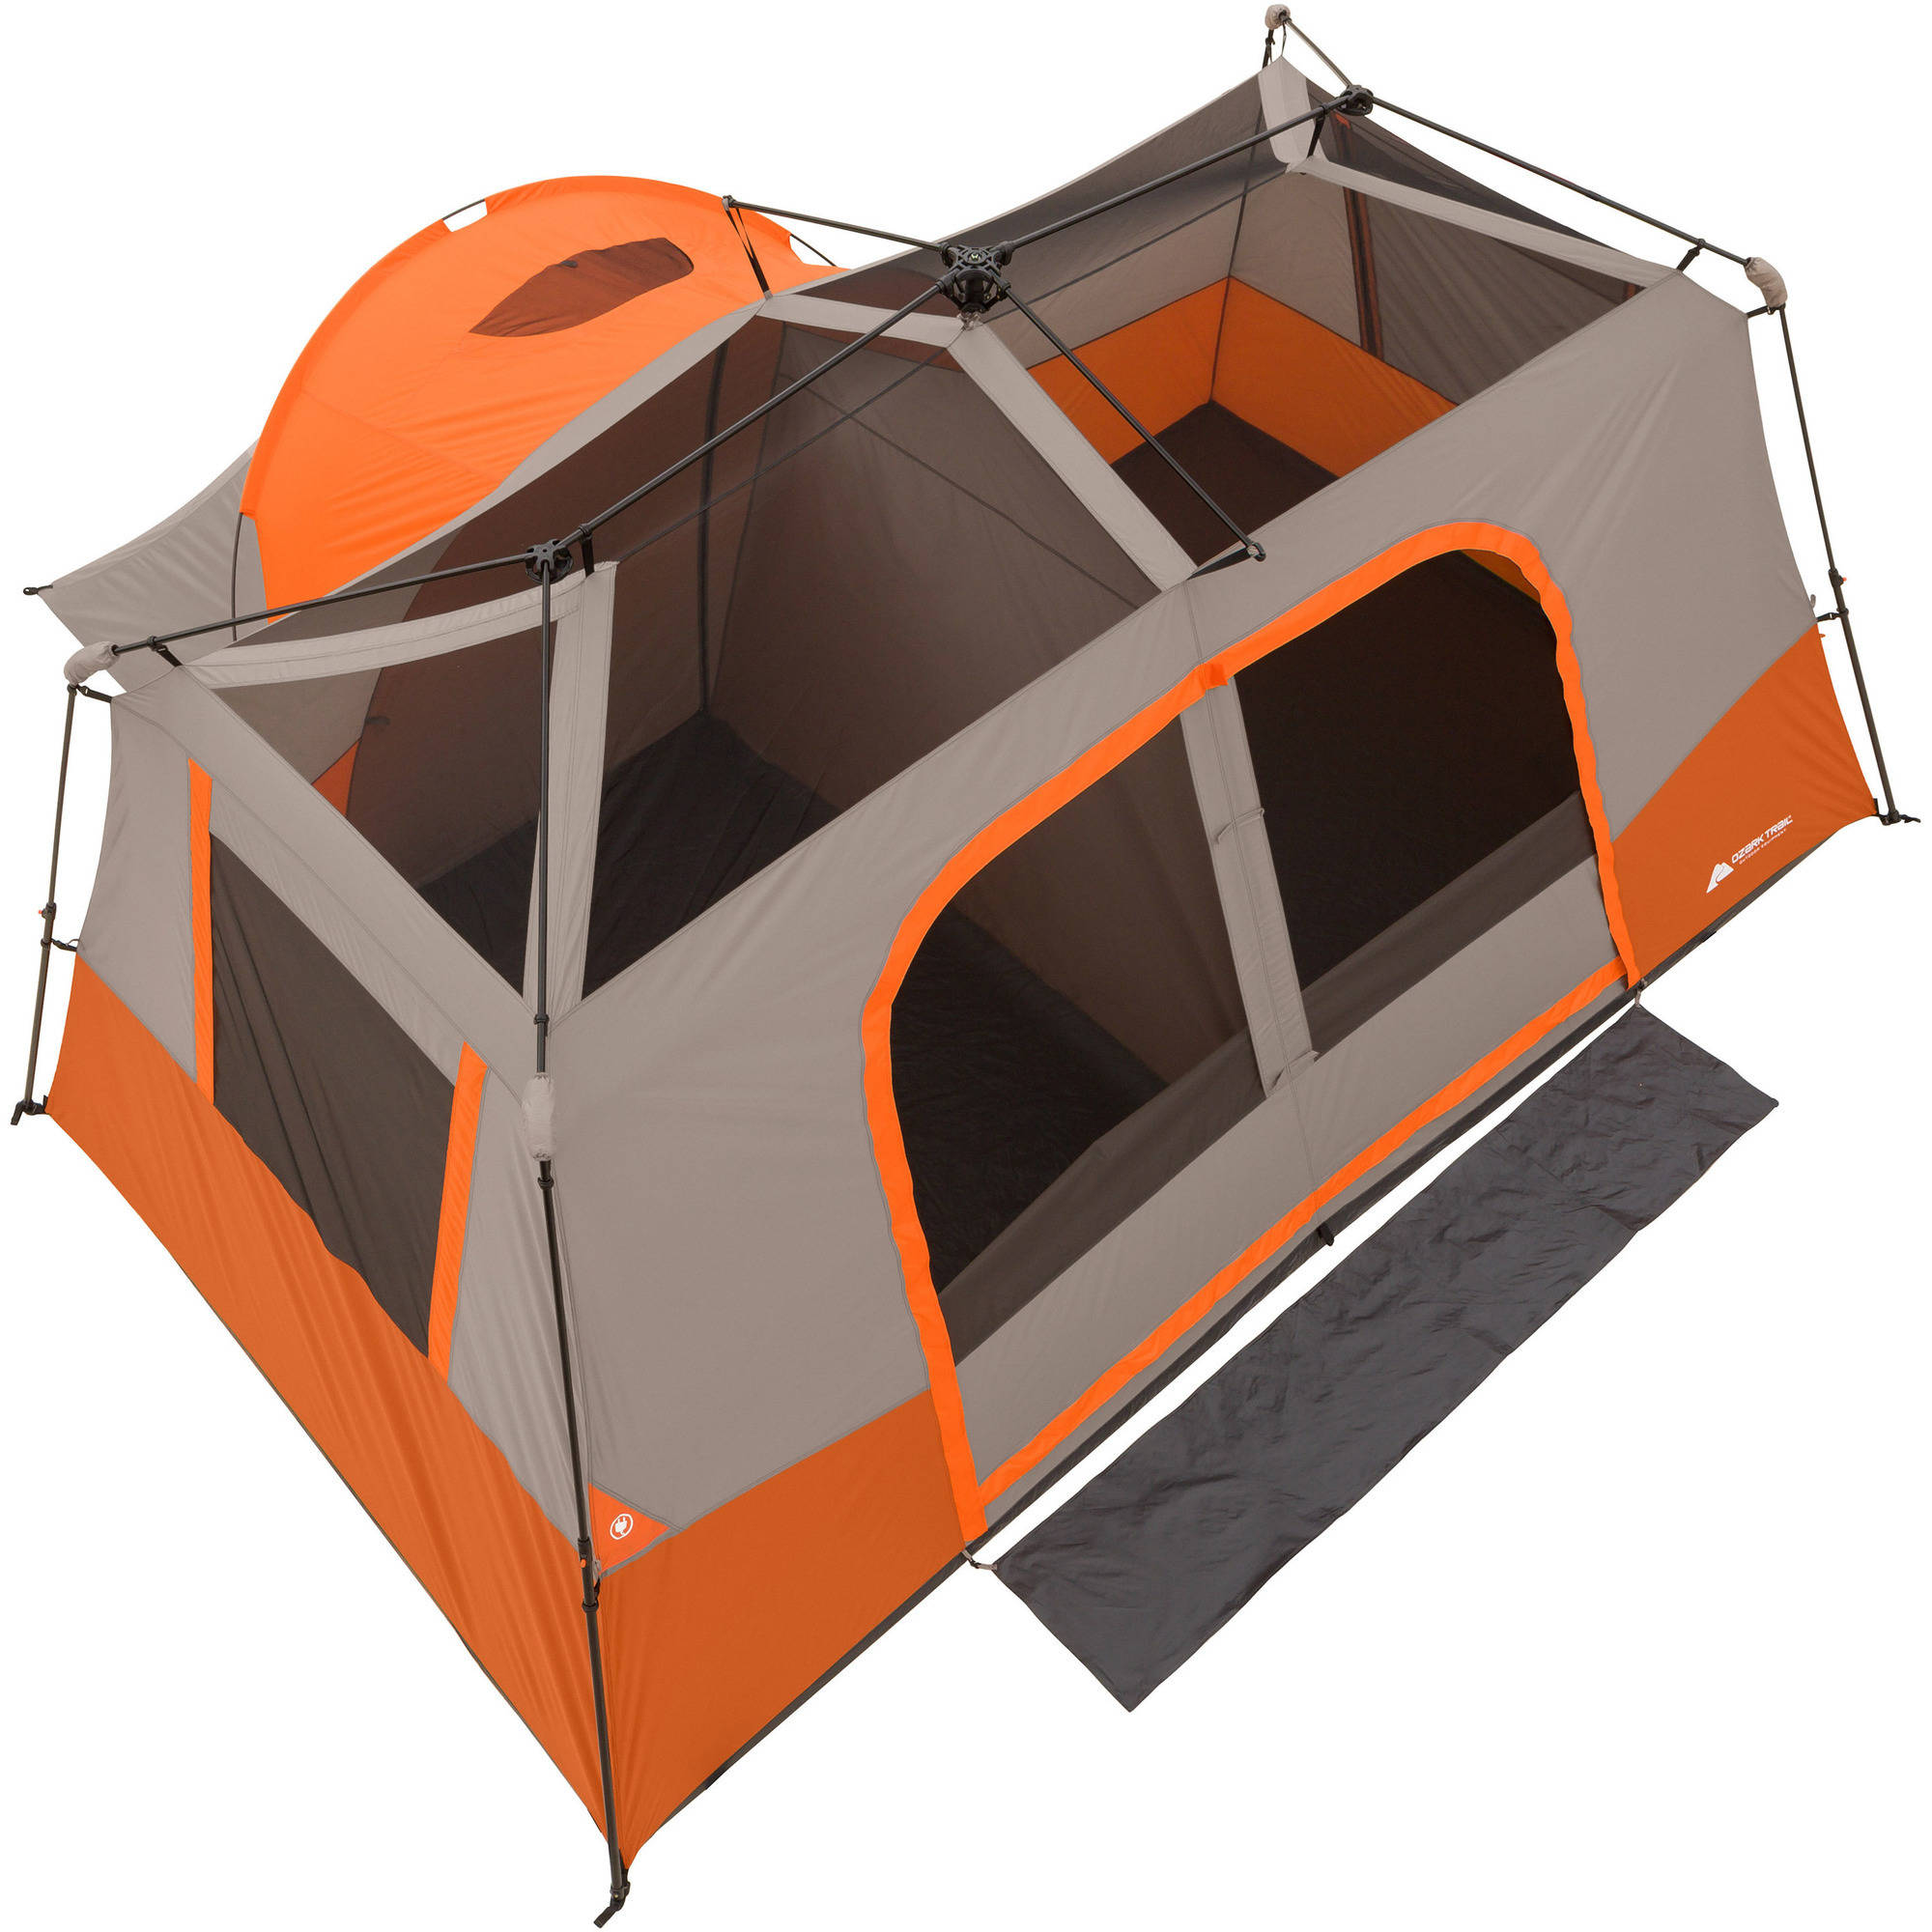 Ozark Trail  14' x 14' 11-Person Instant Cabin Tent with Private Room, 38.37 lbs - image 4 of 7